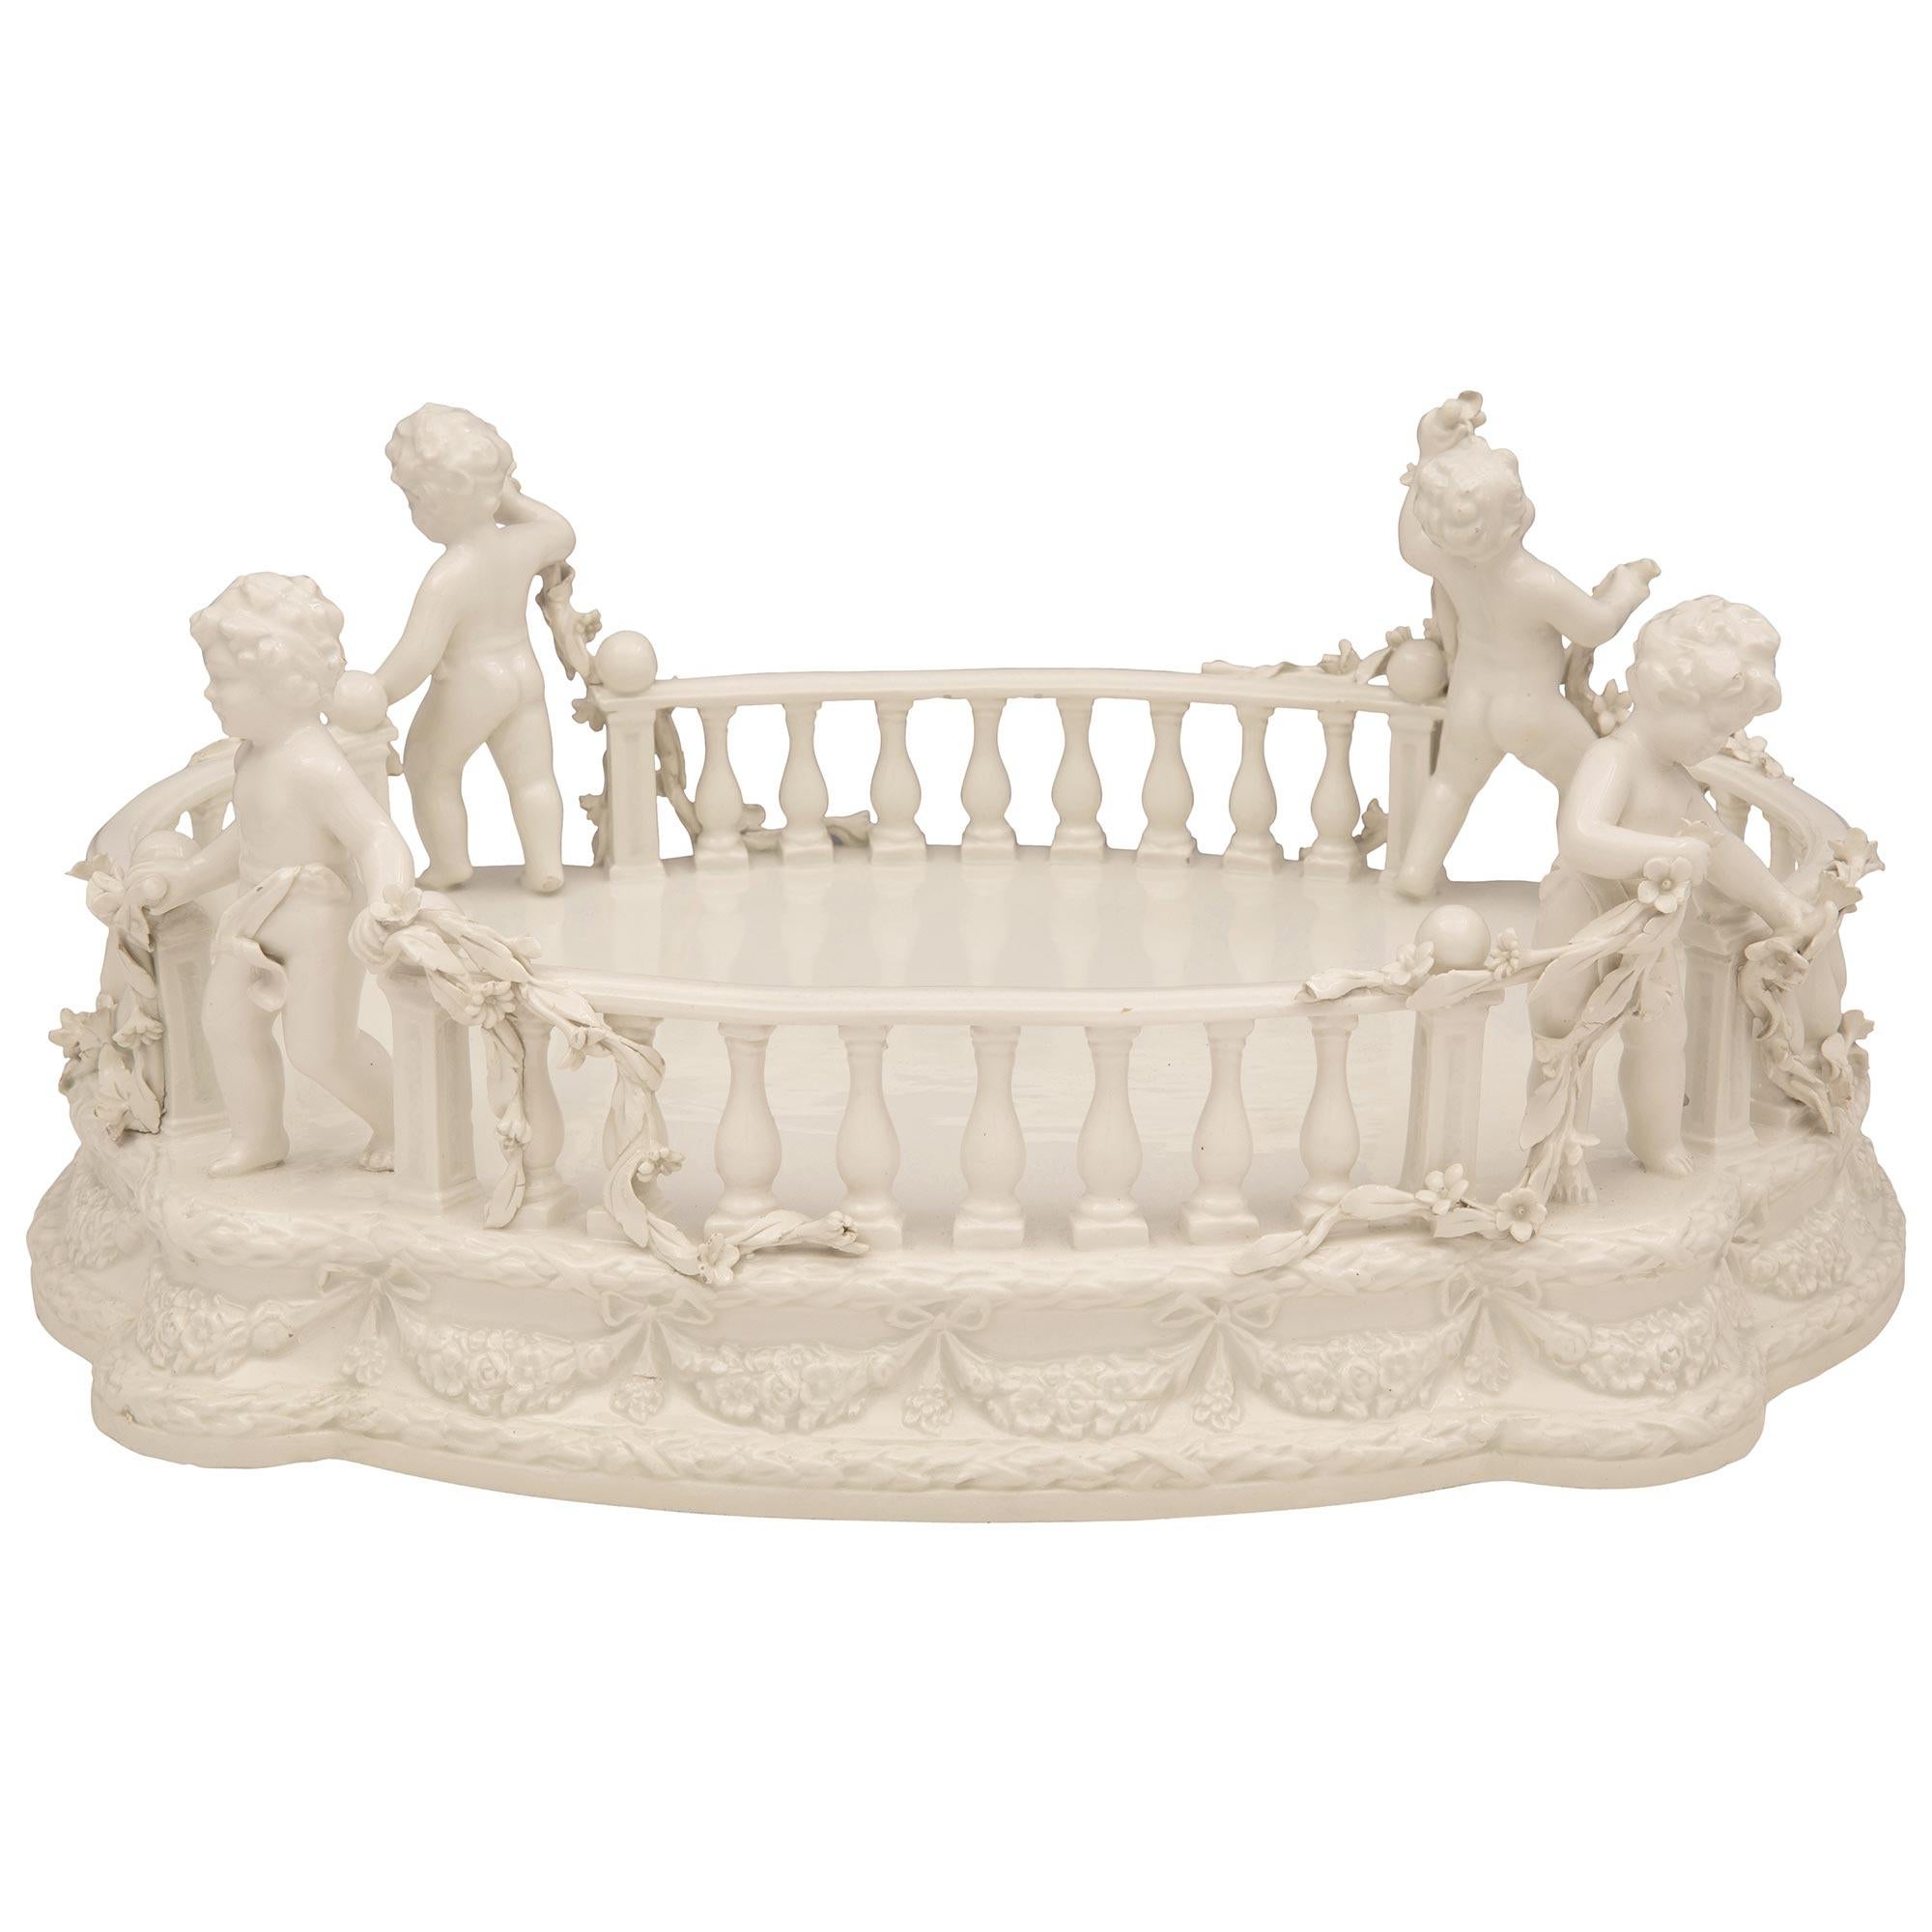 A charming Italian 19th century white porcelain centerpiece, signed Bassano. The centerpiece is raised by a lovely scalloped shaped base with fine tied wrap around berried laurel bands and beautiful swaging floral garlands which extend around the